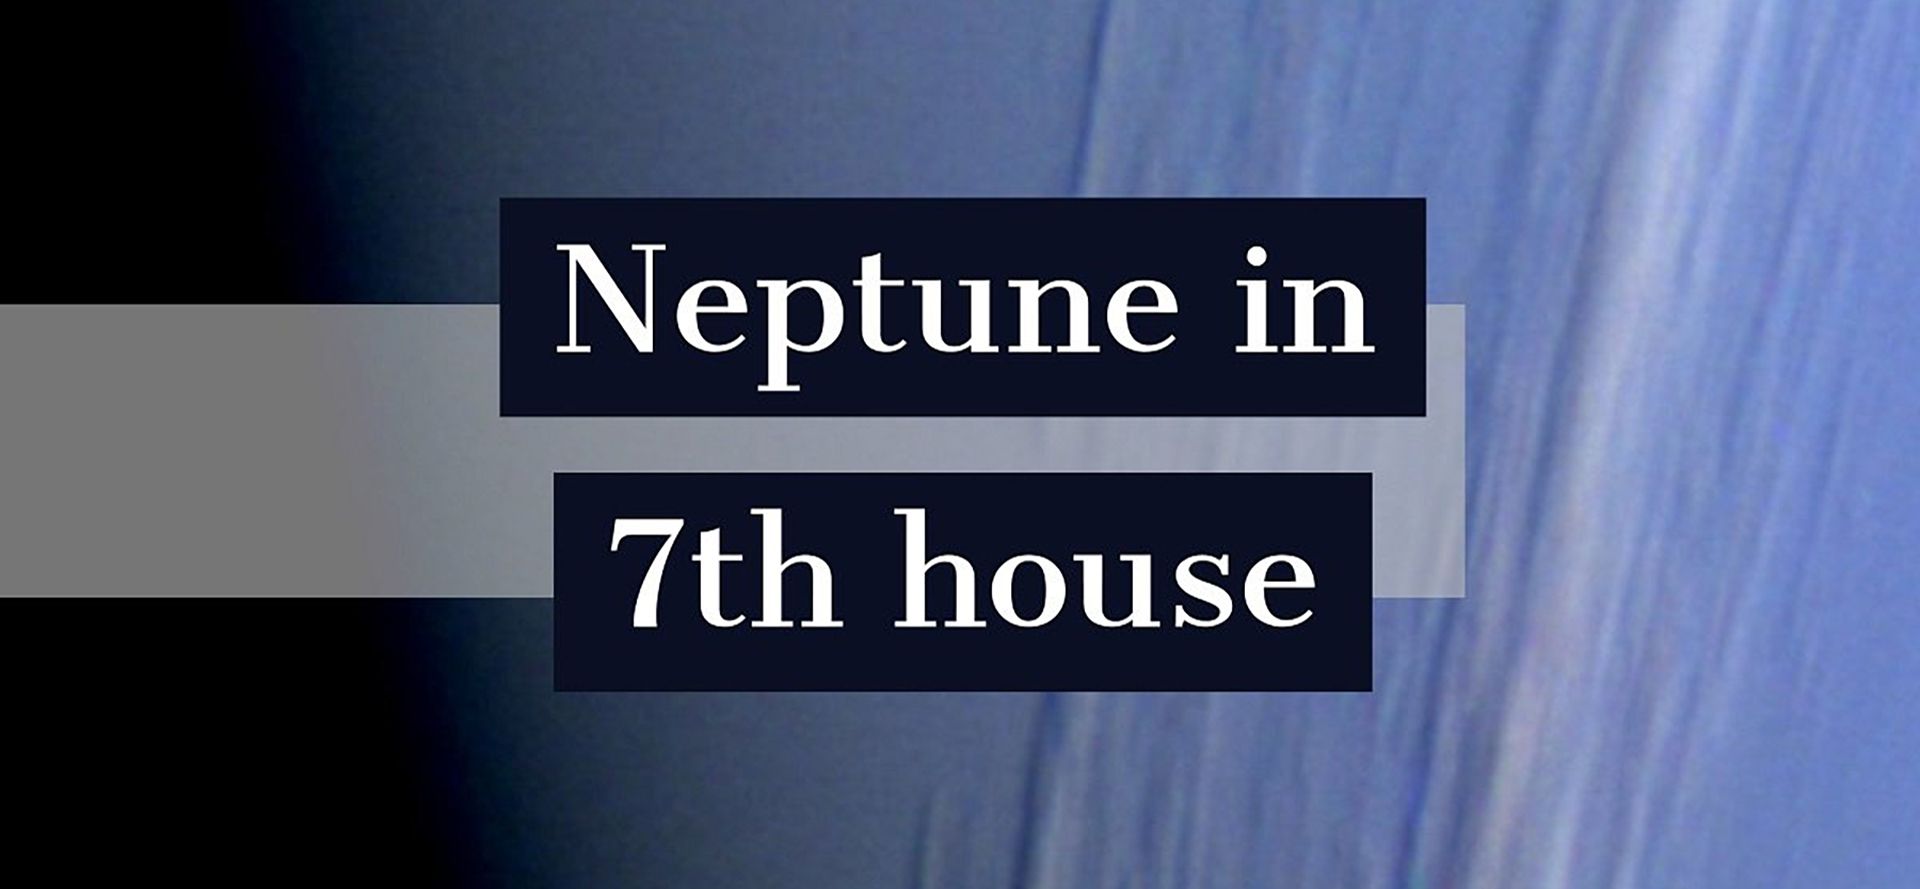 Neptune in 7th house.